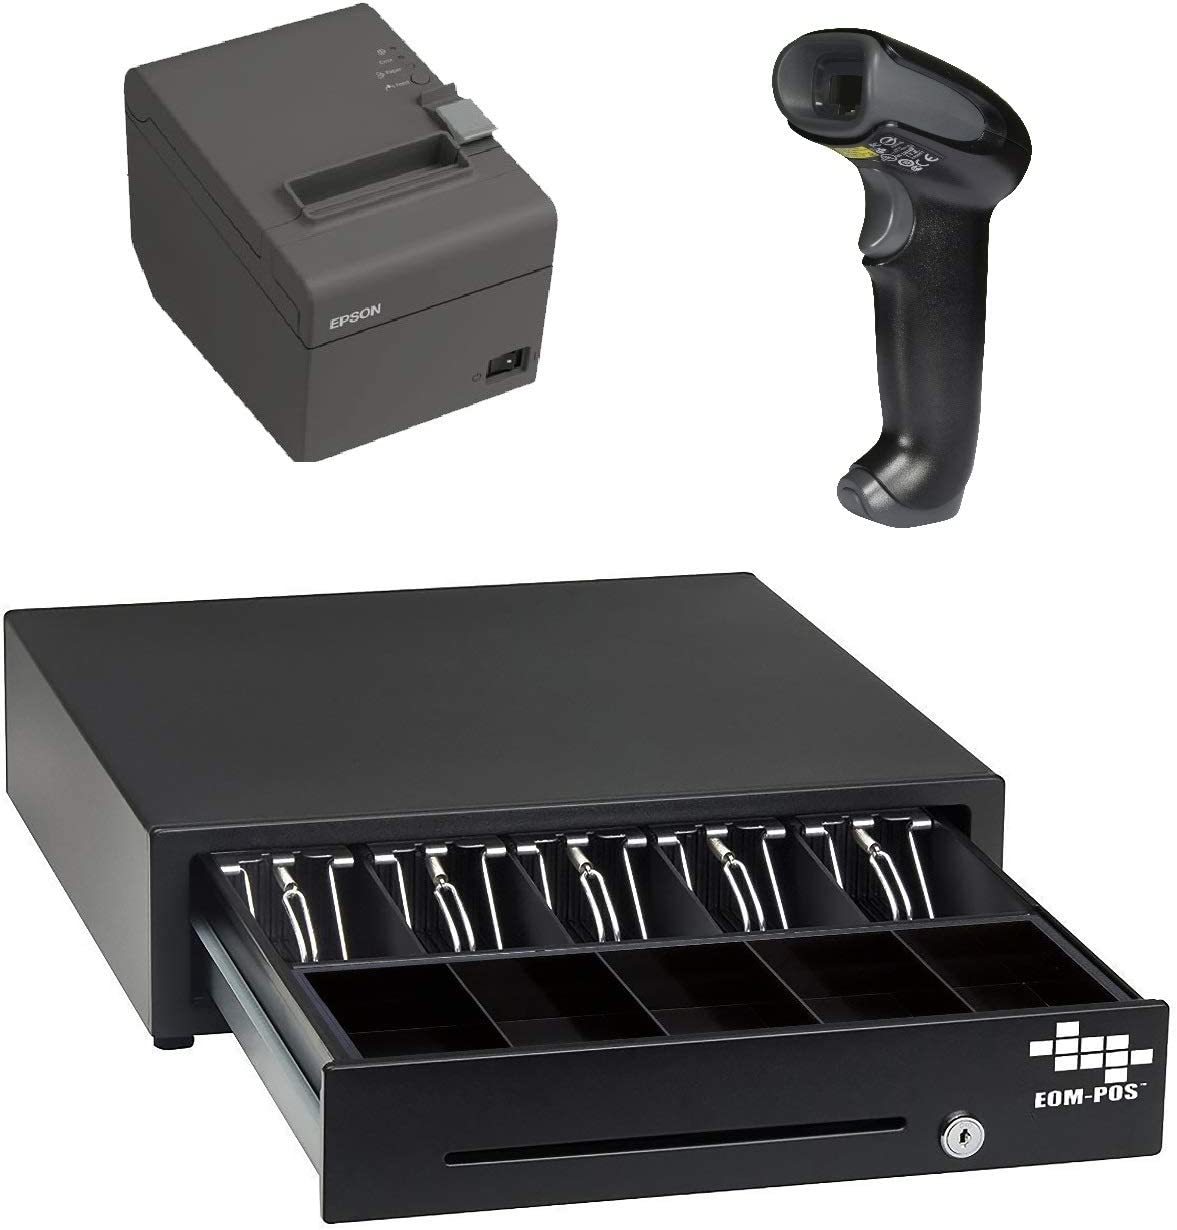 POS Hardware Bundle for Square - Cash Drawer, Thermal Receipt Printer, and - $493.99